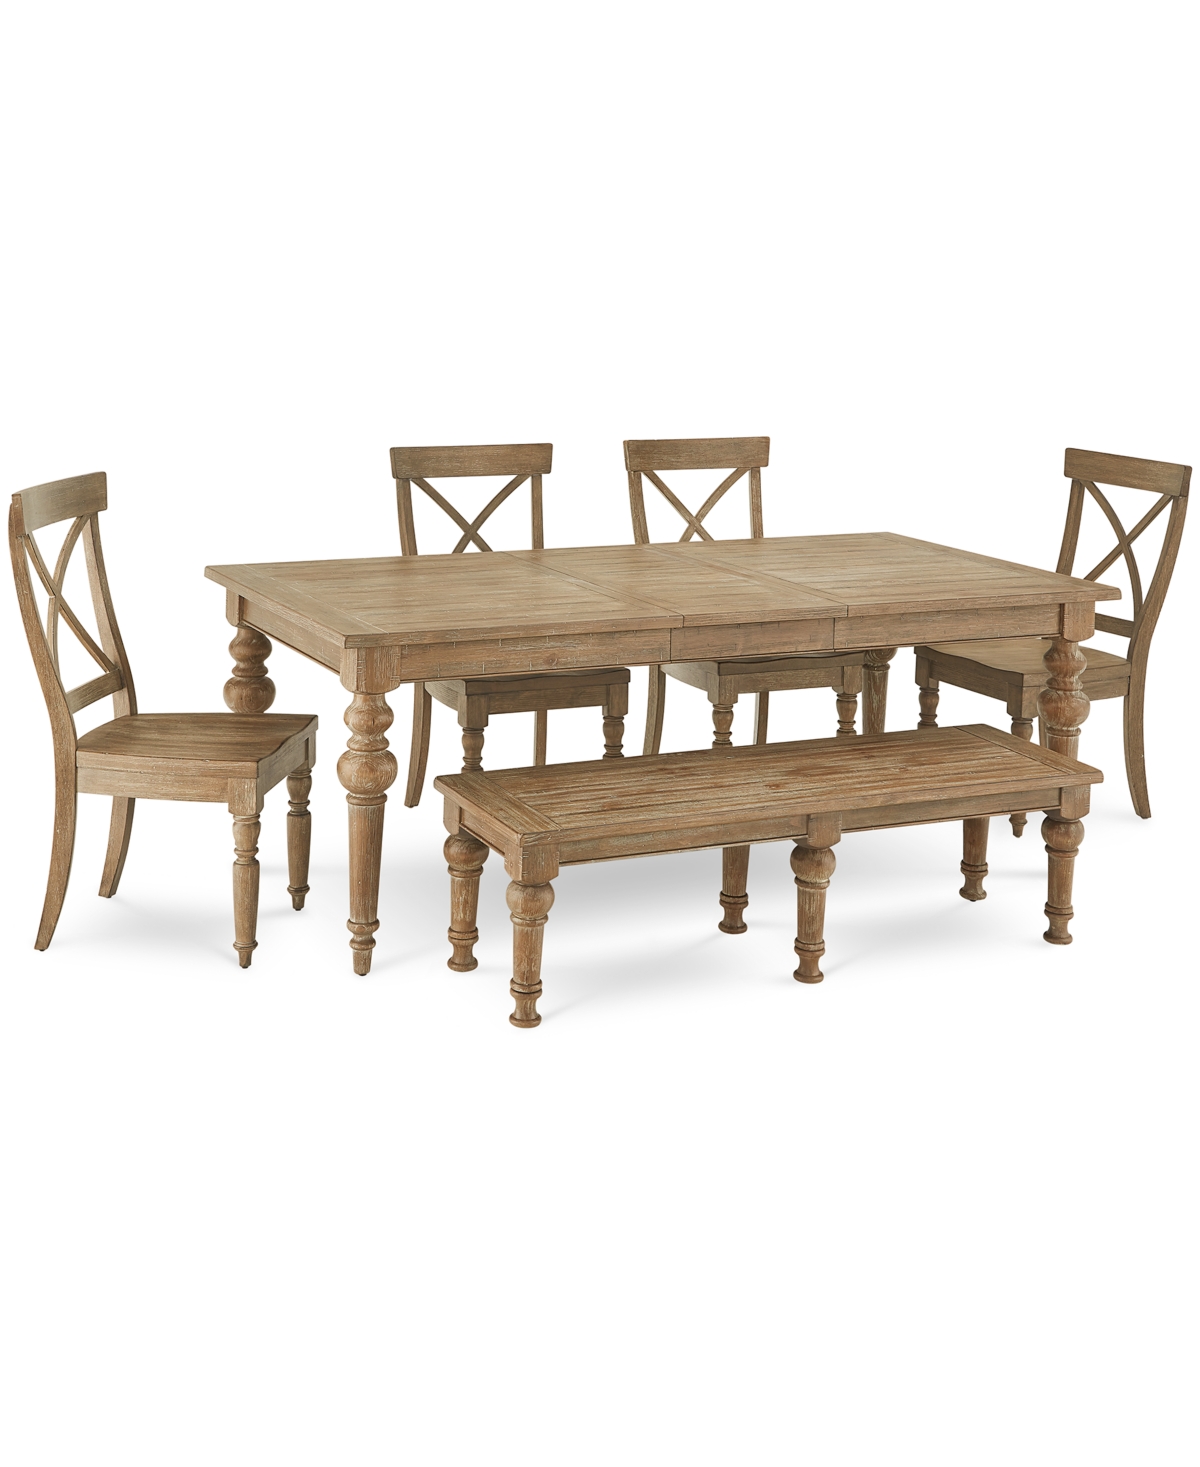 Furniture Sonora 6-pc. Dining Set (rectangular Expandable Table + 4 X-back Side Chairs + Bench)